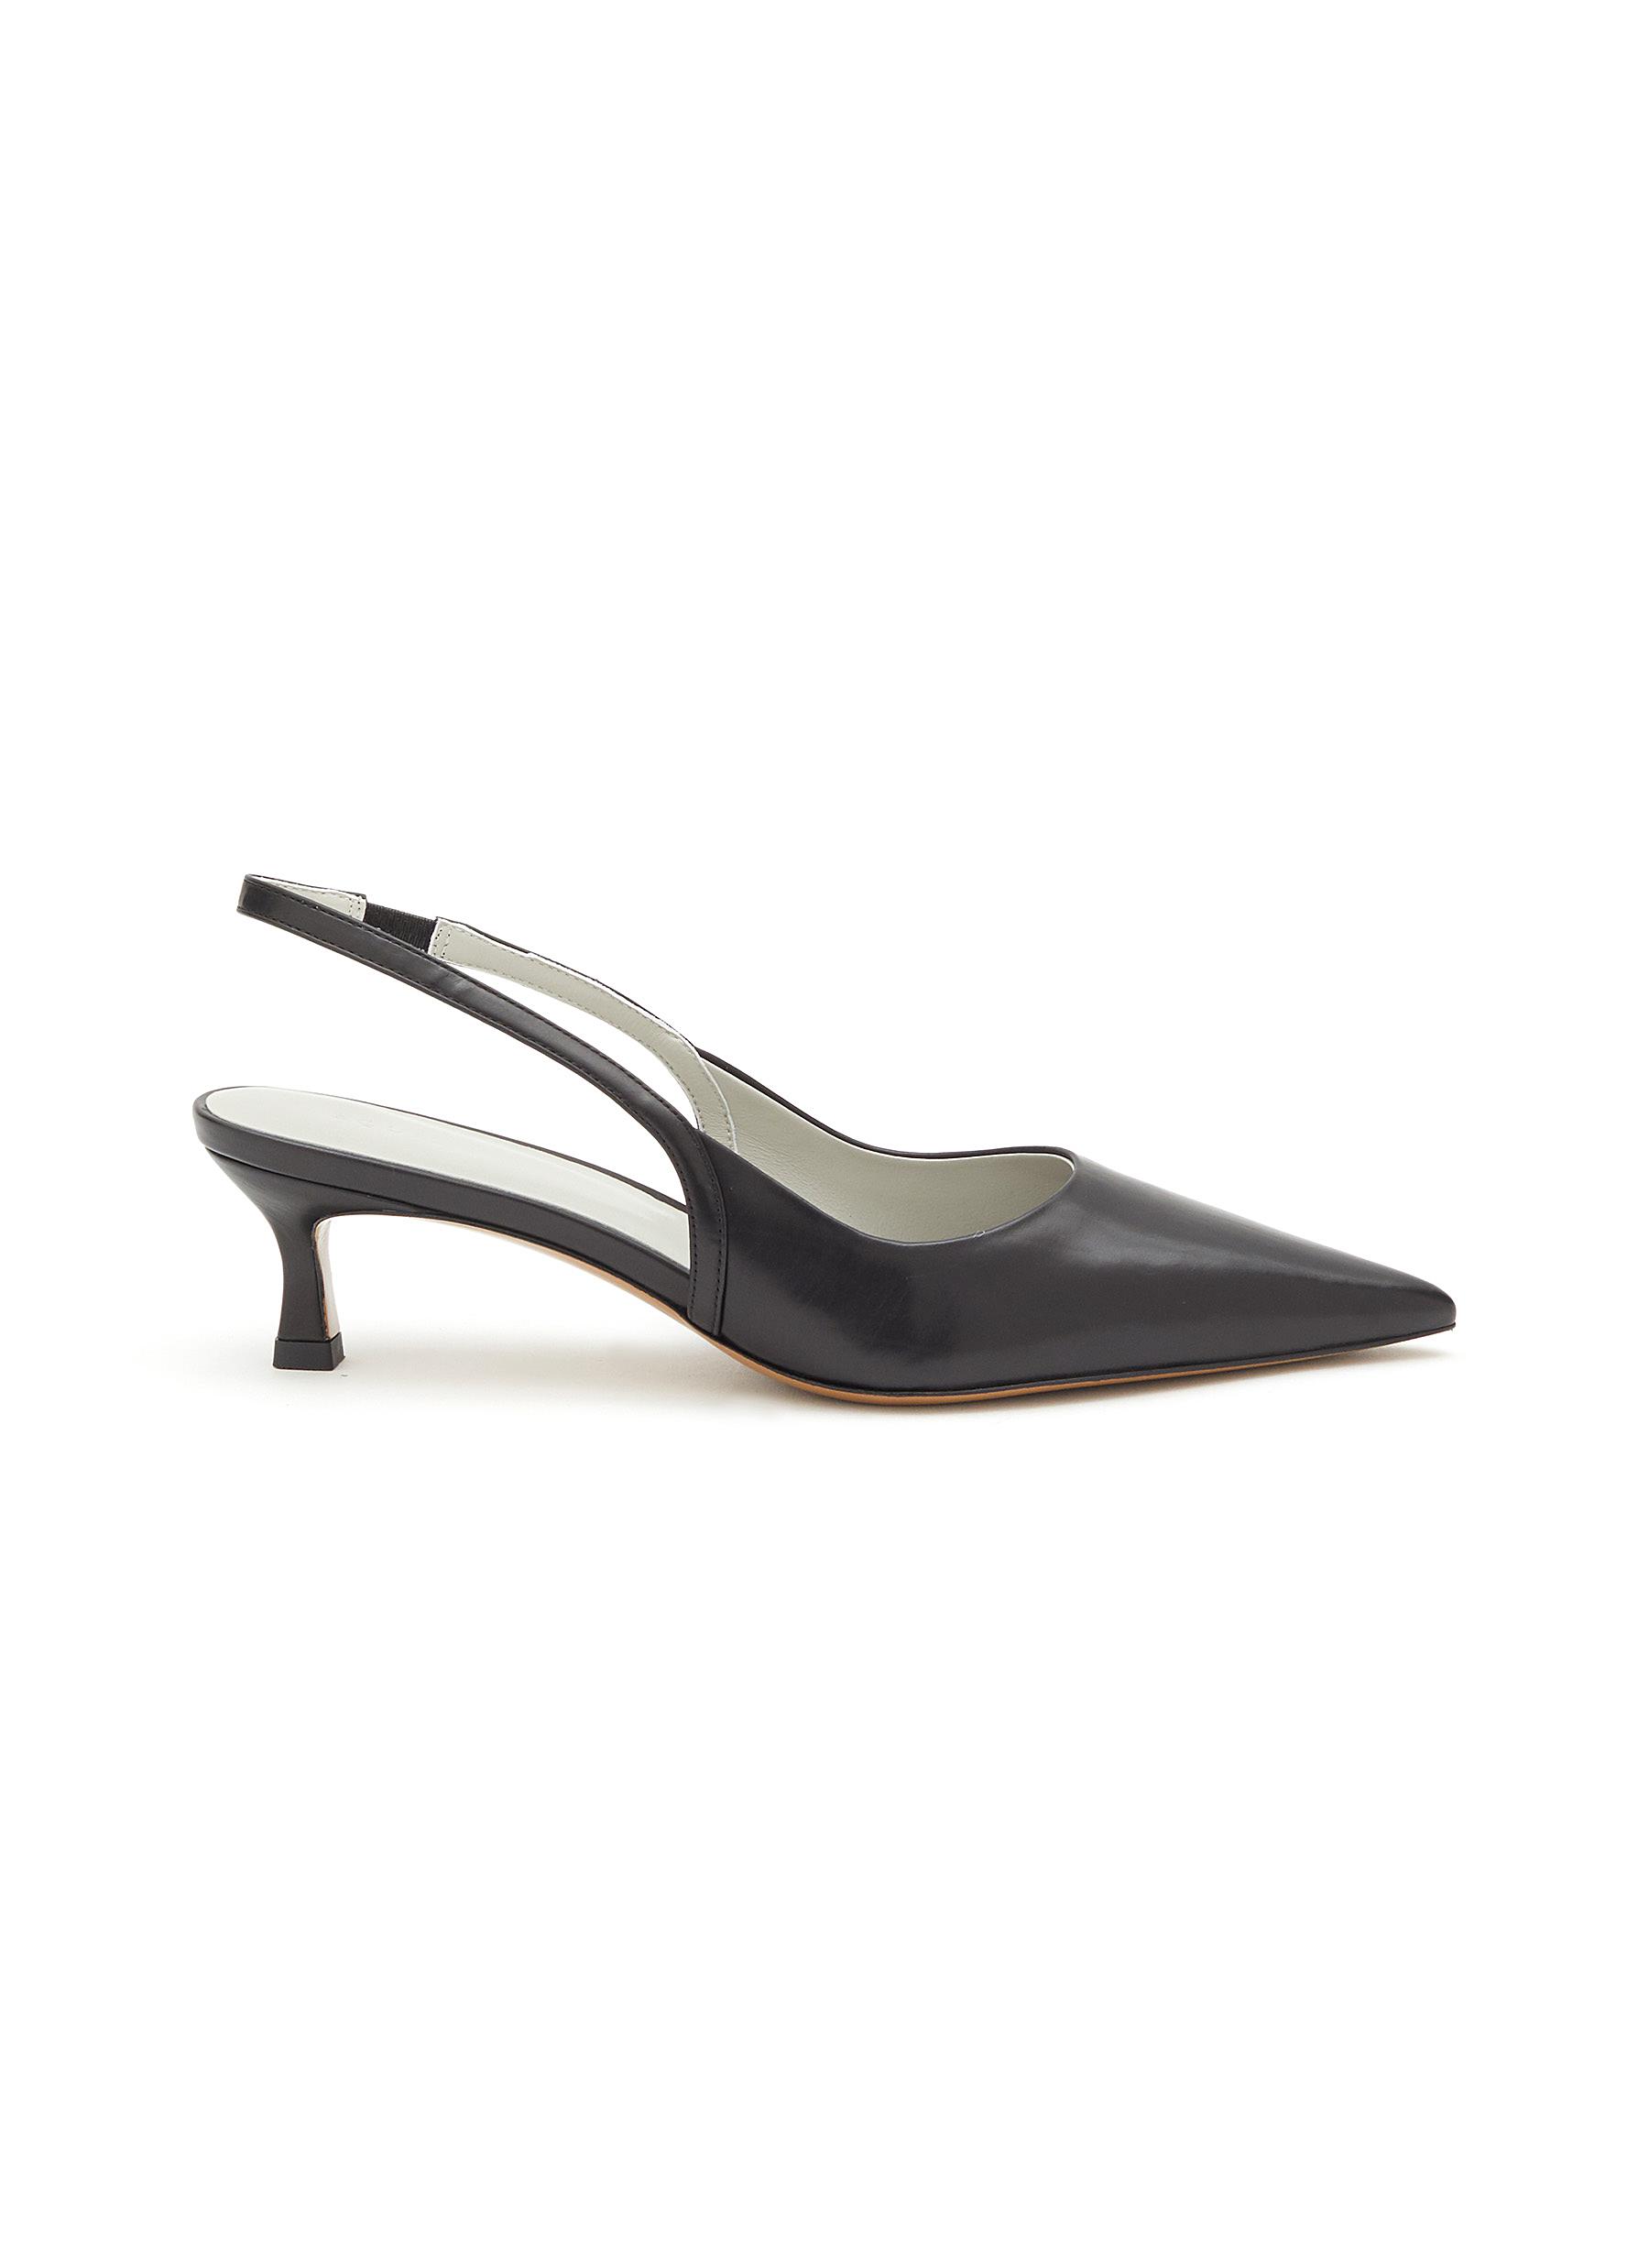 EQUIL ‘Lyon' 50 Leather Point Toe Slingback Pumps